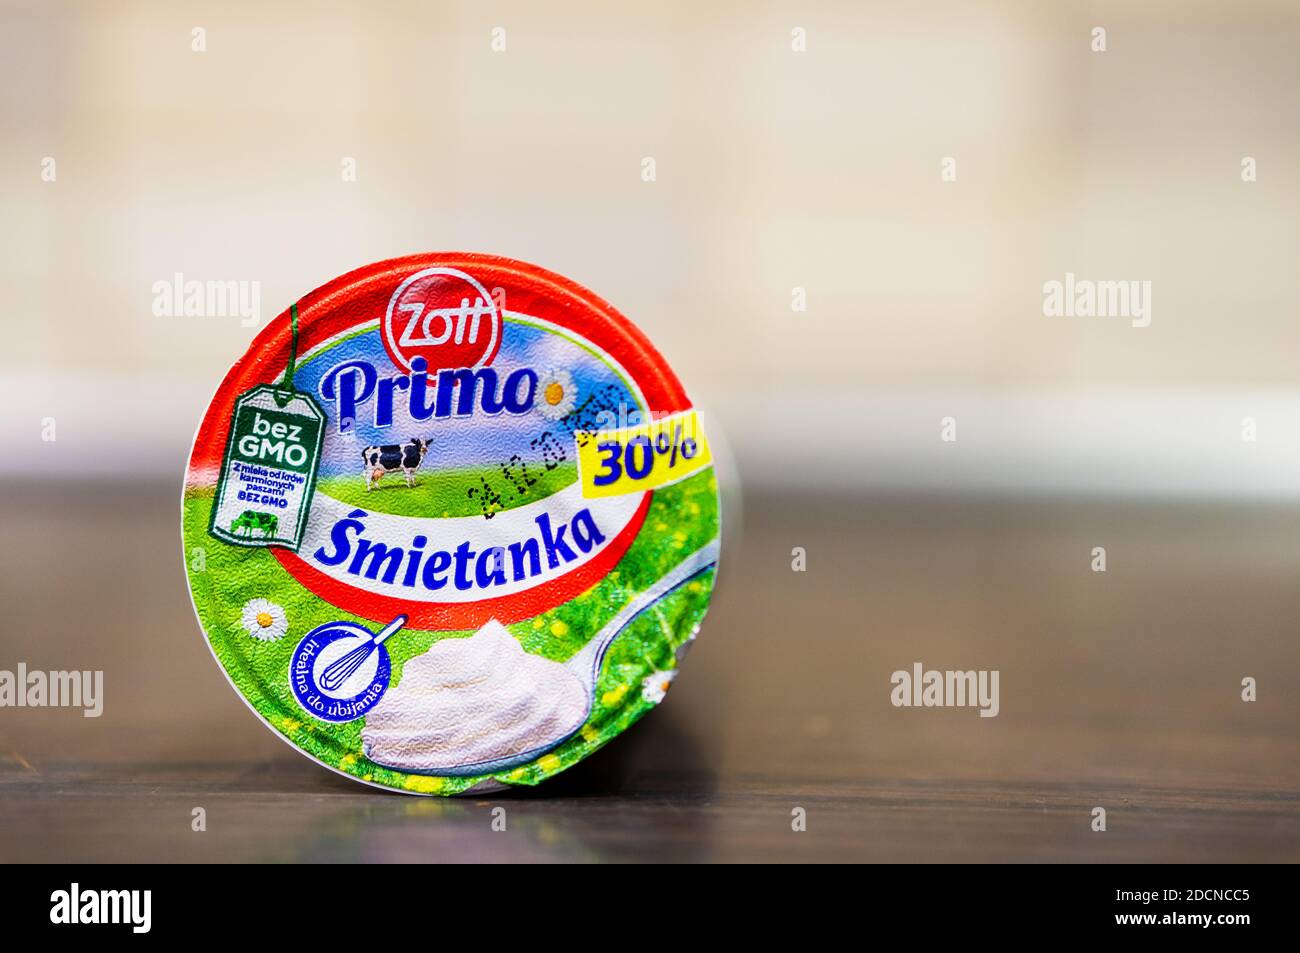 POZNAN, POLAND - Nov 21, 2020: Polish Zott Primo cream with 30 percent fat  in a cup on a wooden table in soft focus background Stock Photo - Alamy